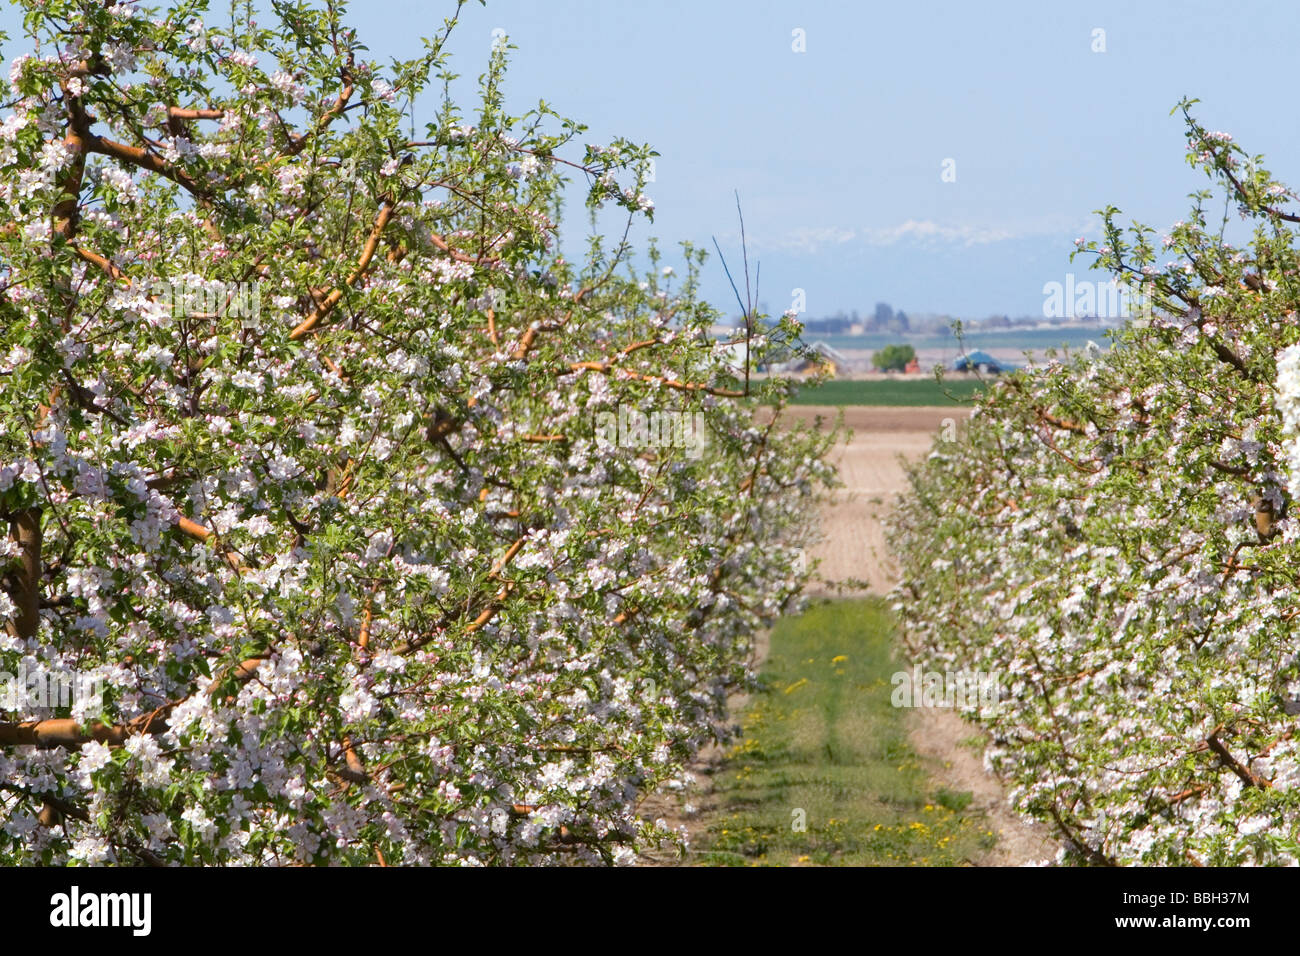 Apple blossoms on trees in an orchard near Parma Idaho USA  Stock Photo